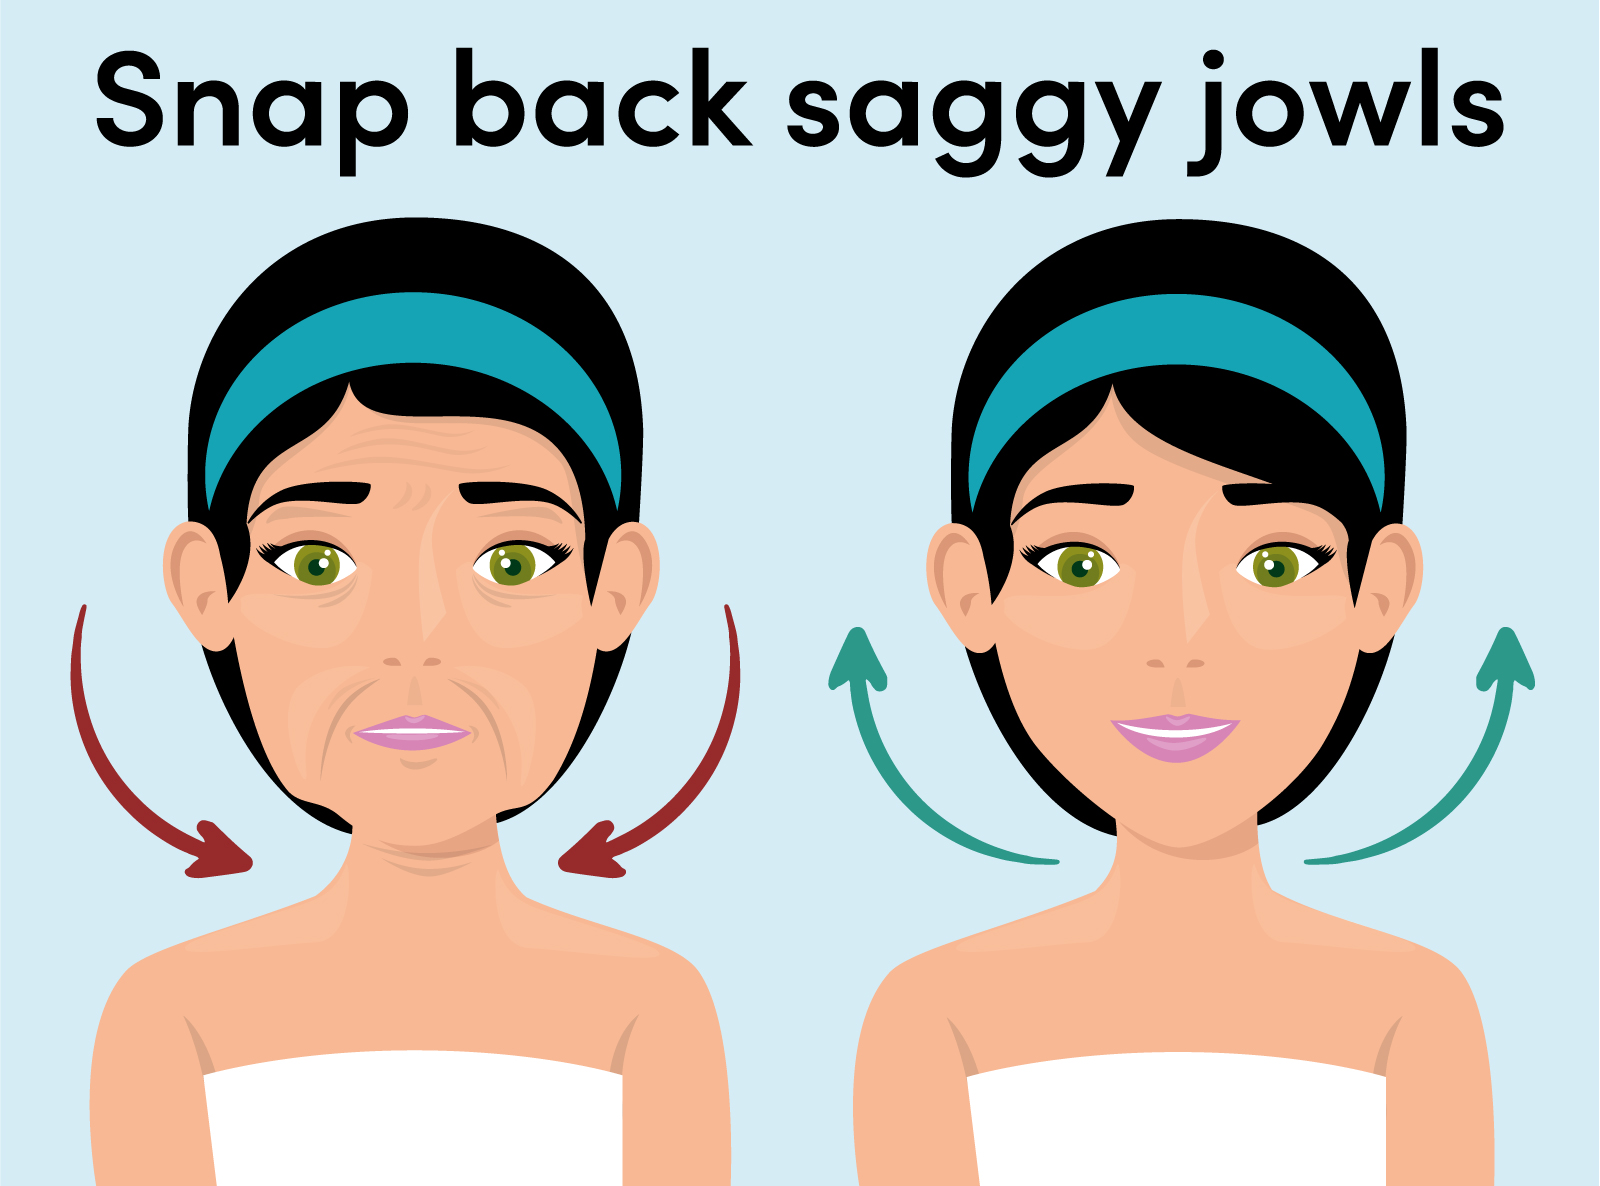 thermage treatment for saggy jowls - skin tightening treatment